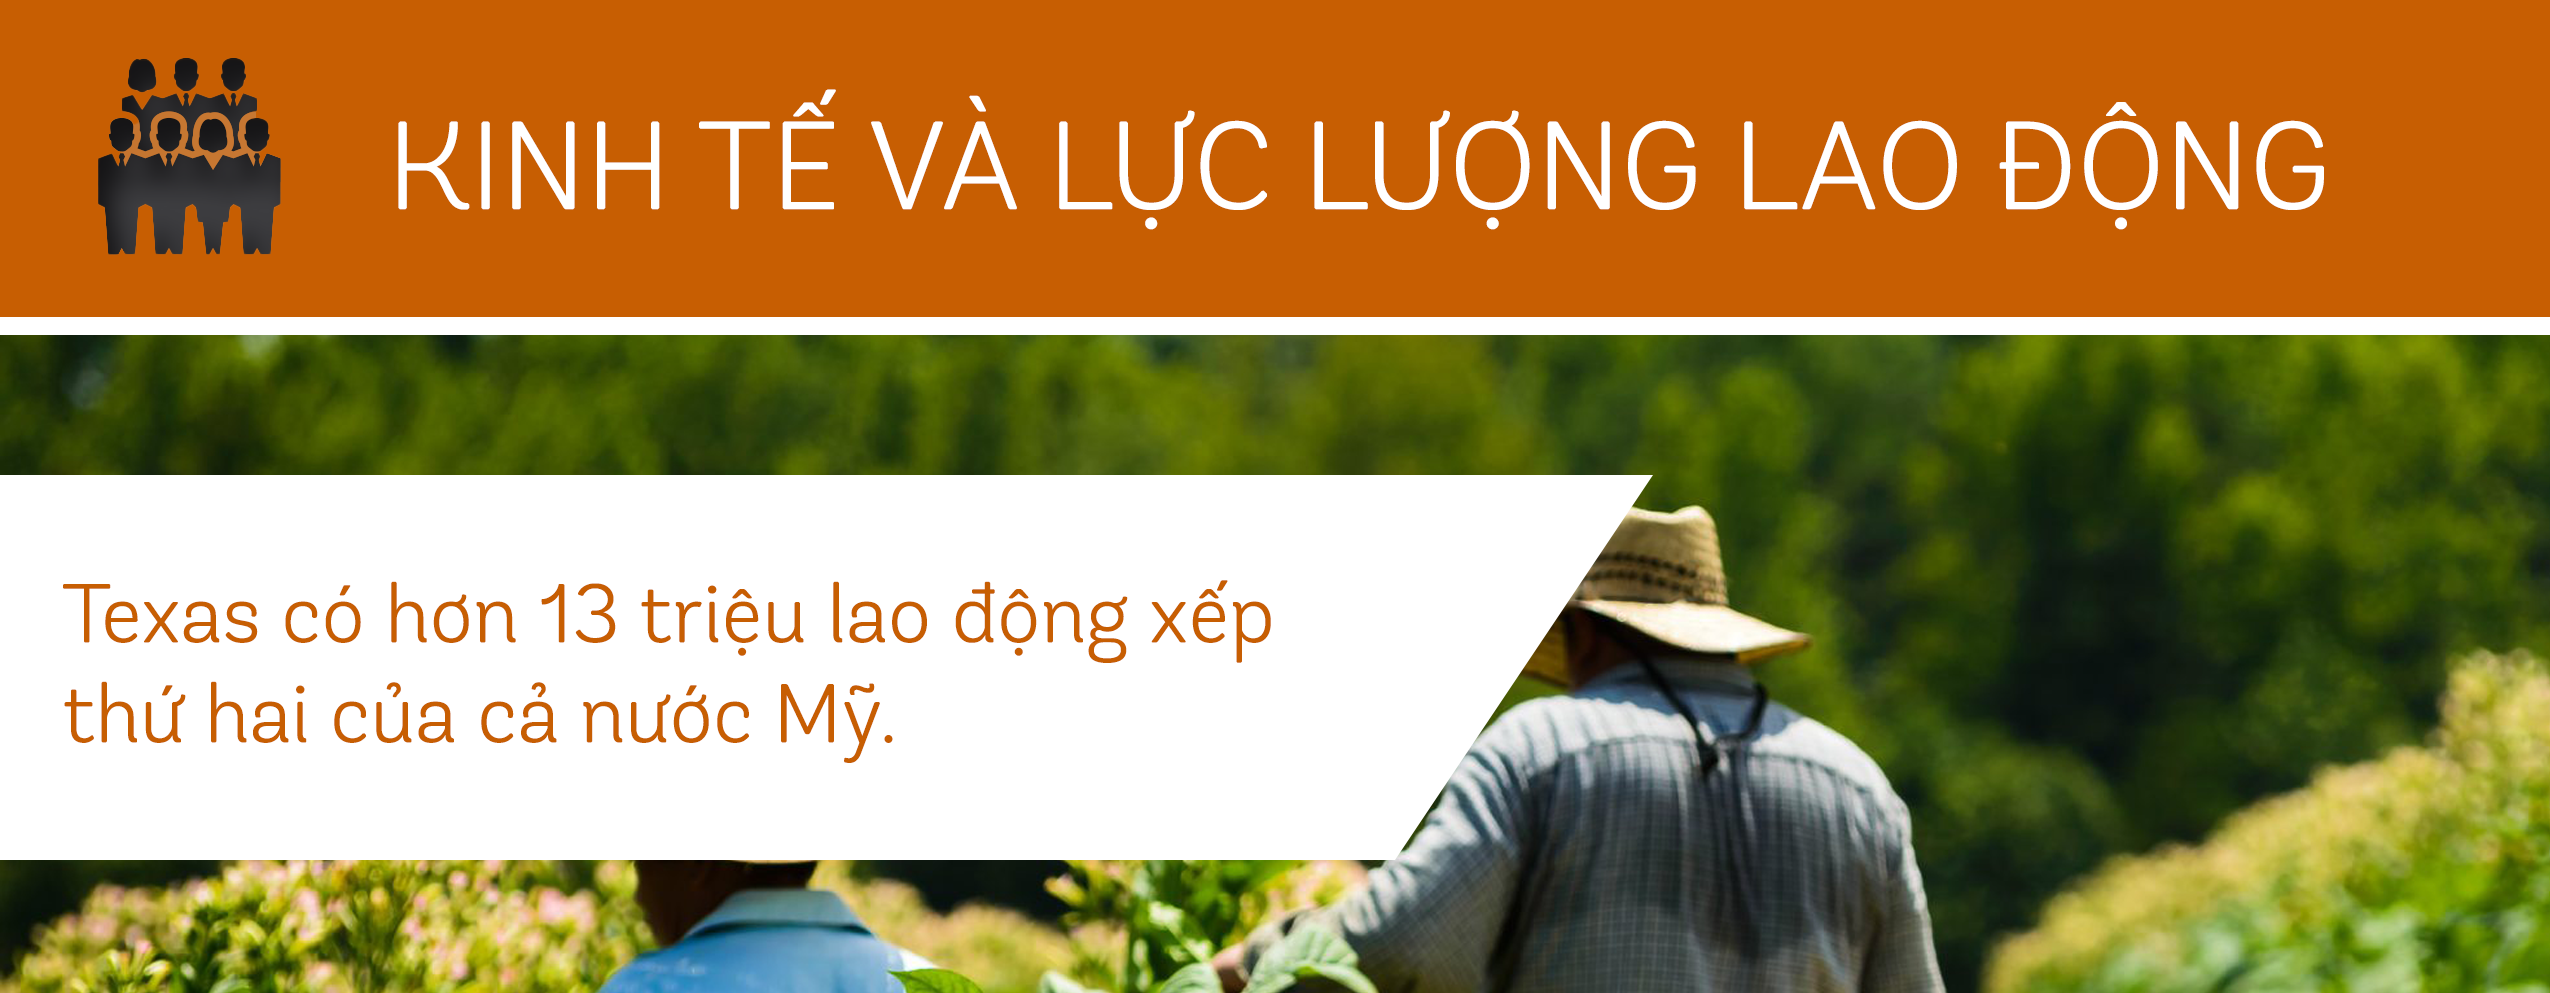 Luc Luong Lao Dong